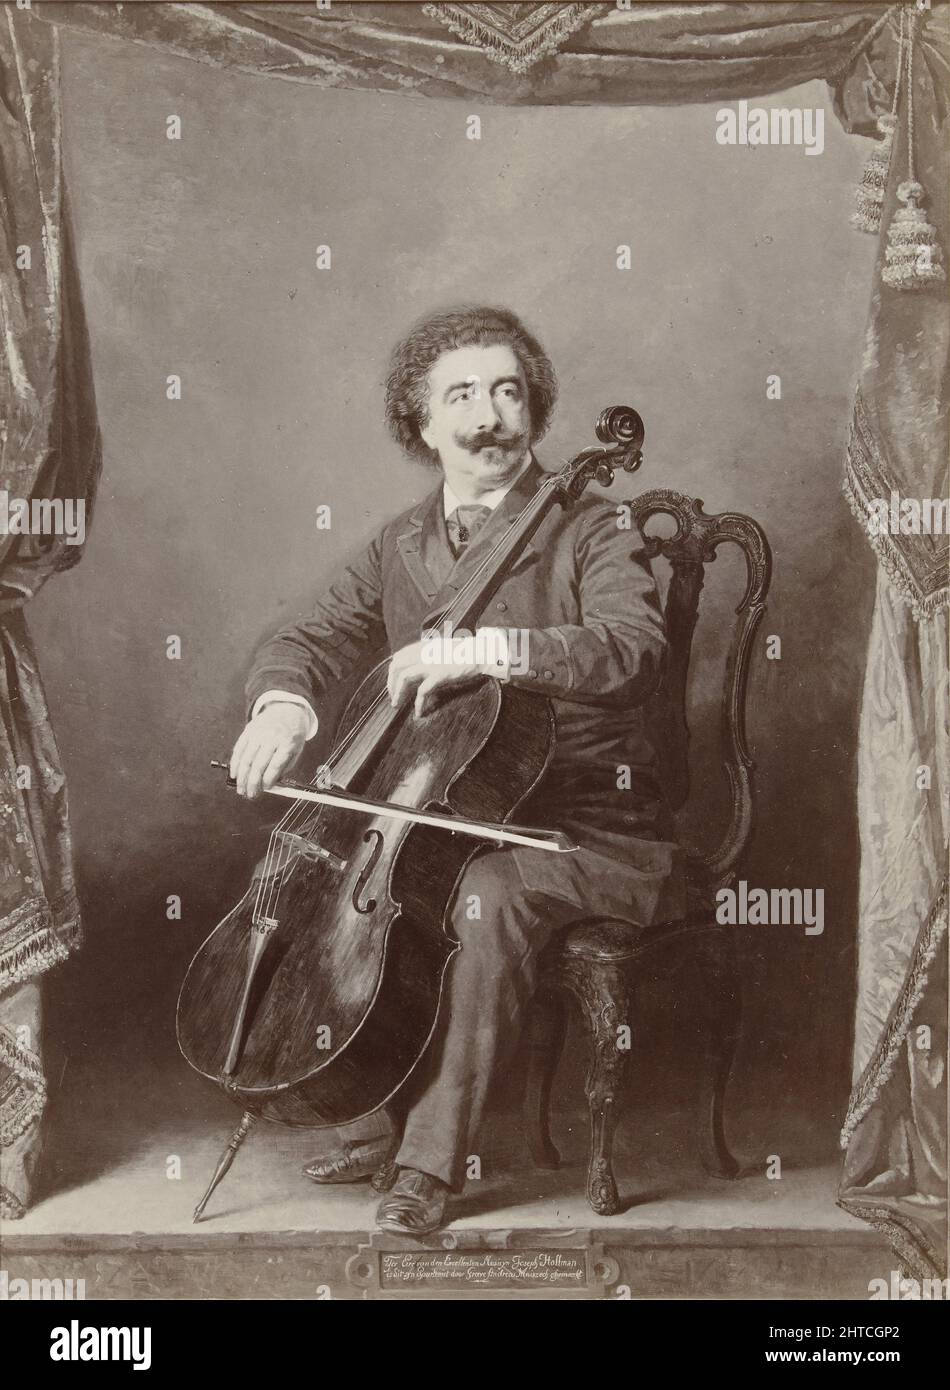 Portrait of the cellist and composer Joseph Hollman (1852-1926), c. 1890. Private Collection. Stock Photo